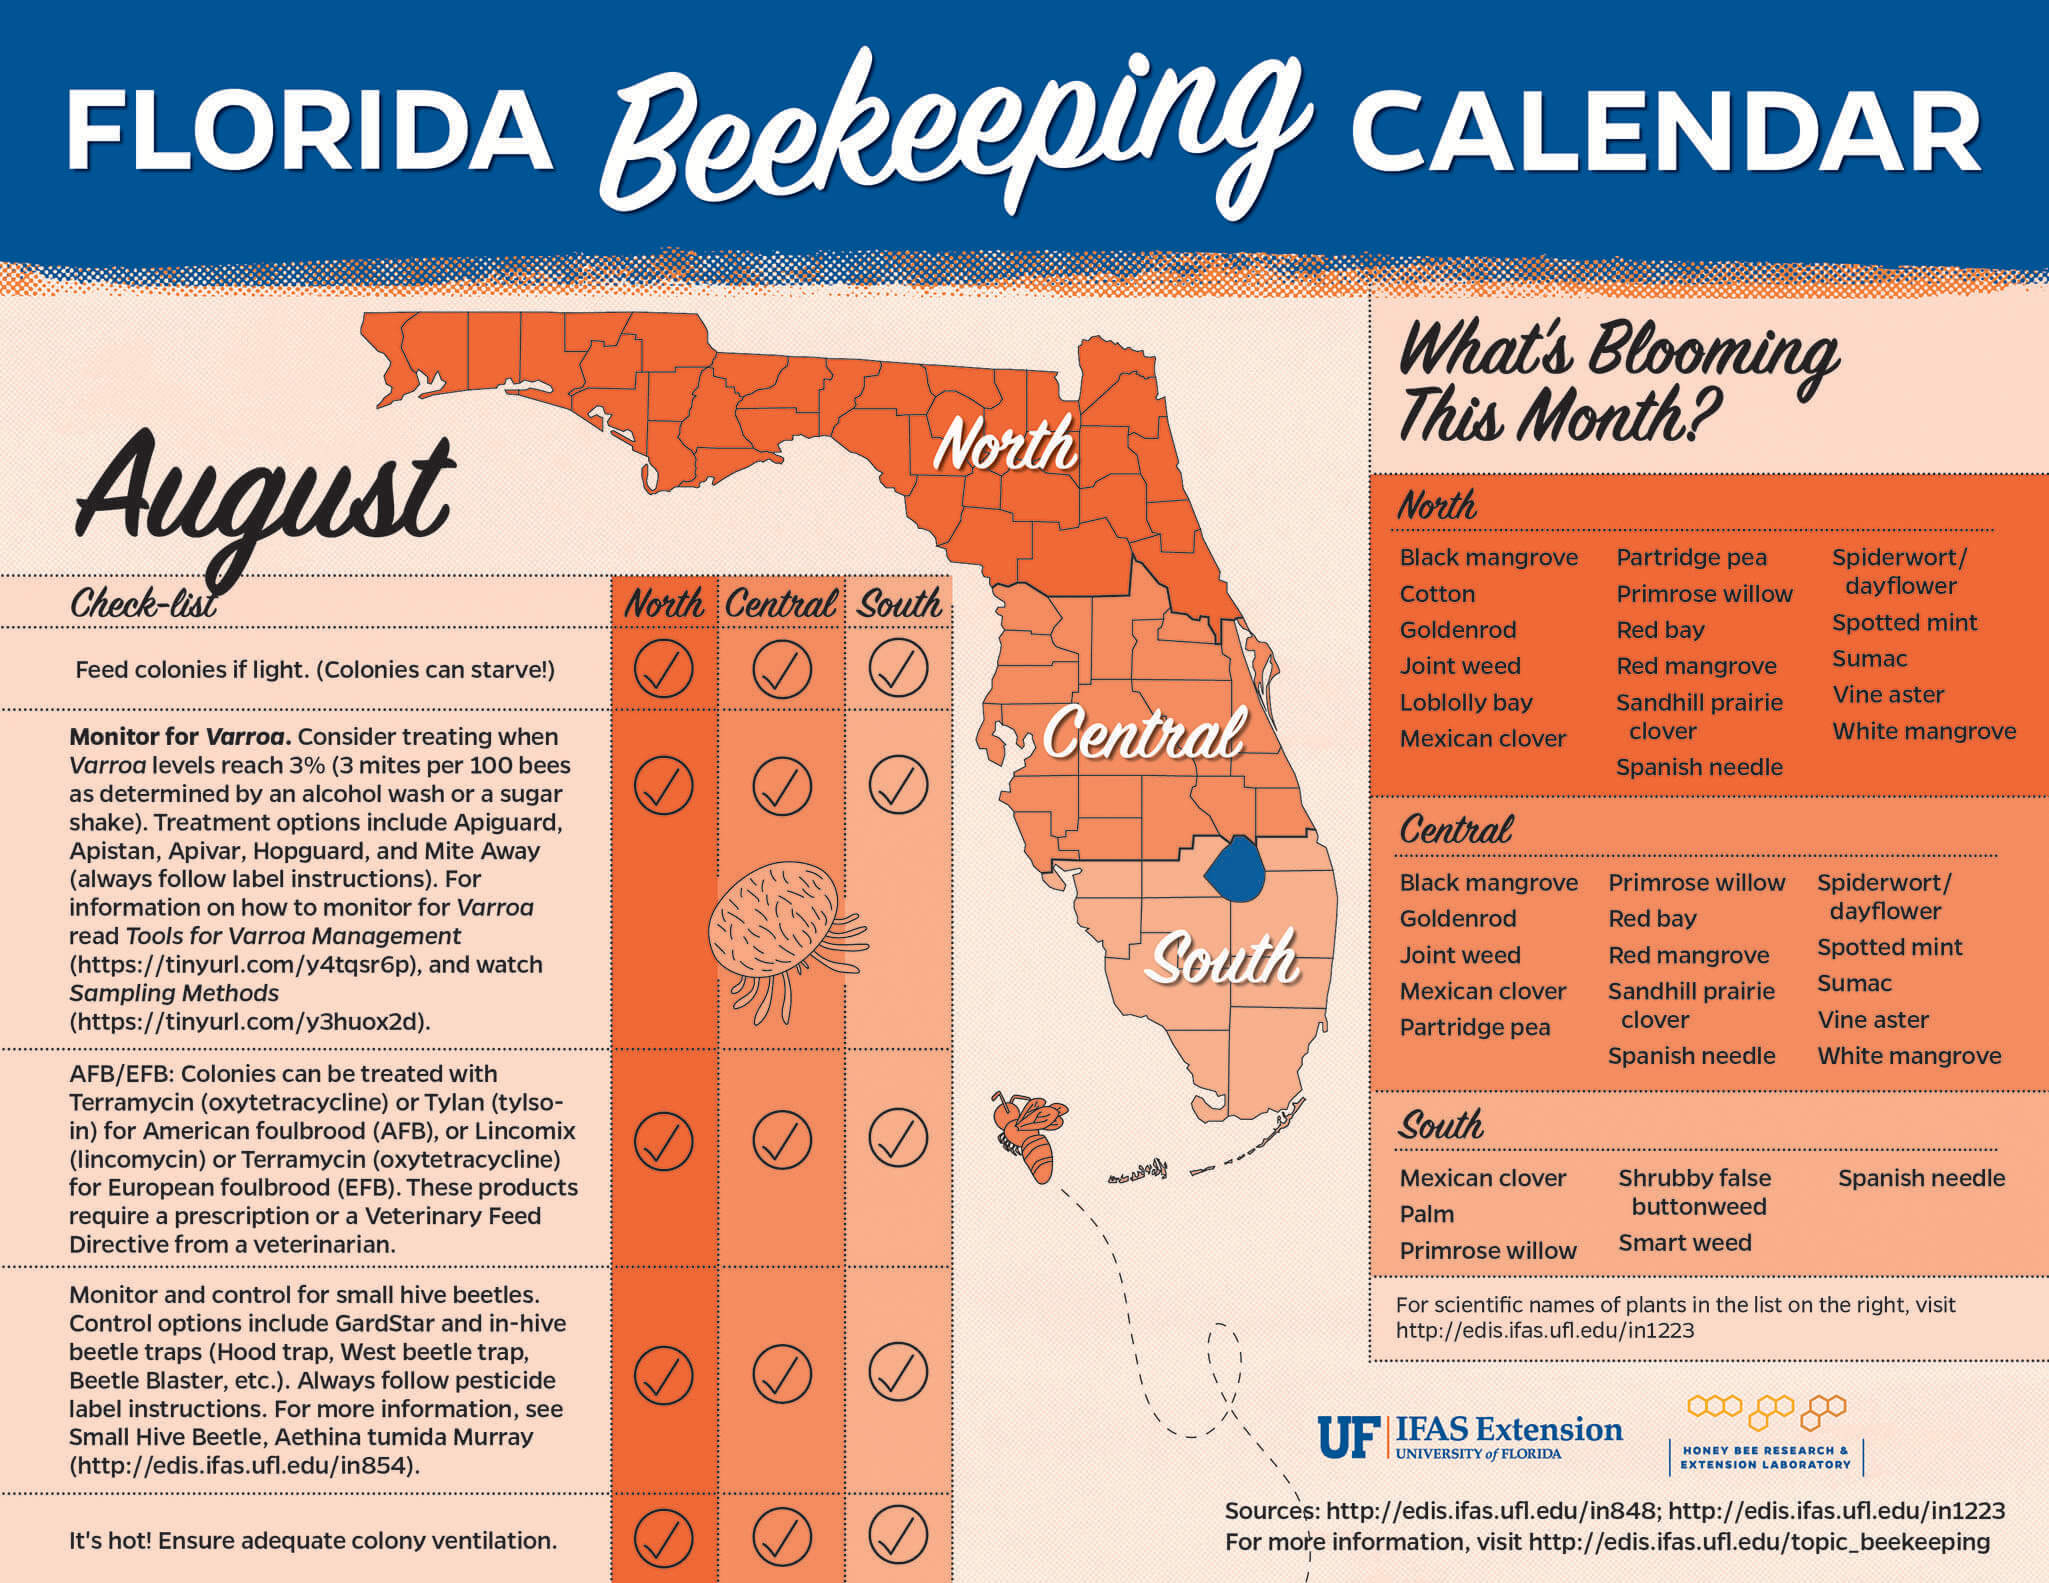 Florida beekeeping calendar for the month of August